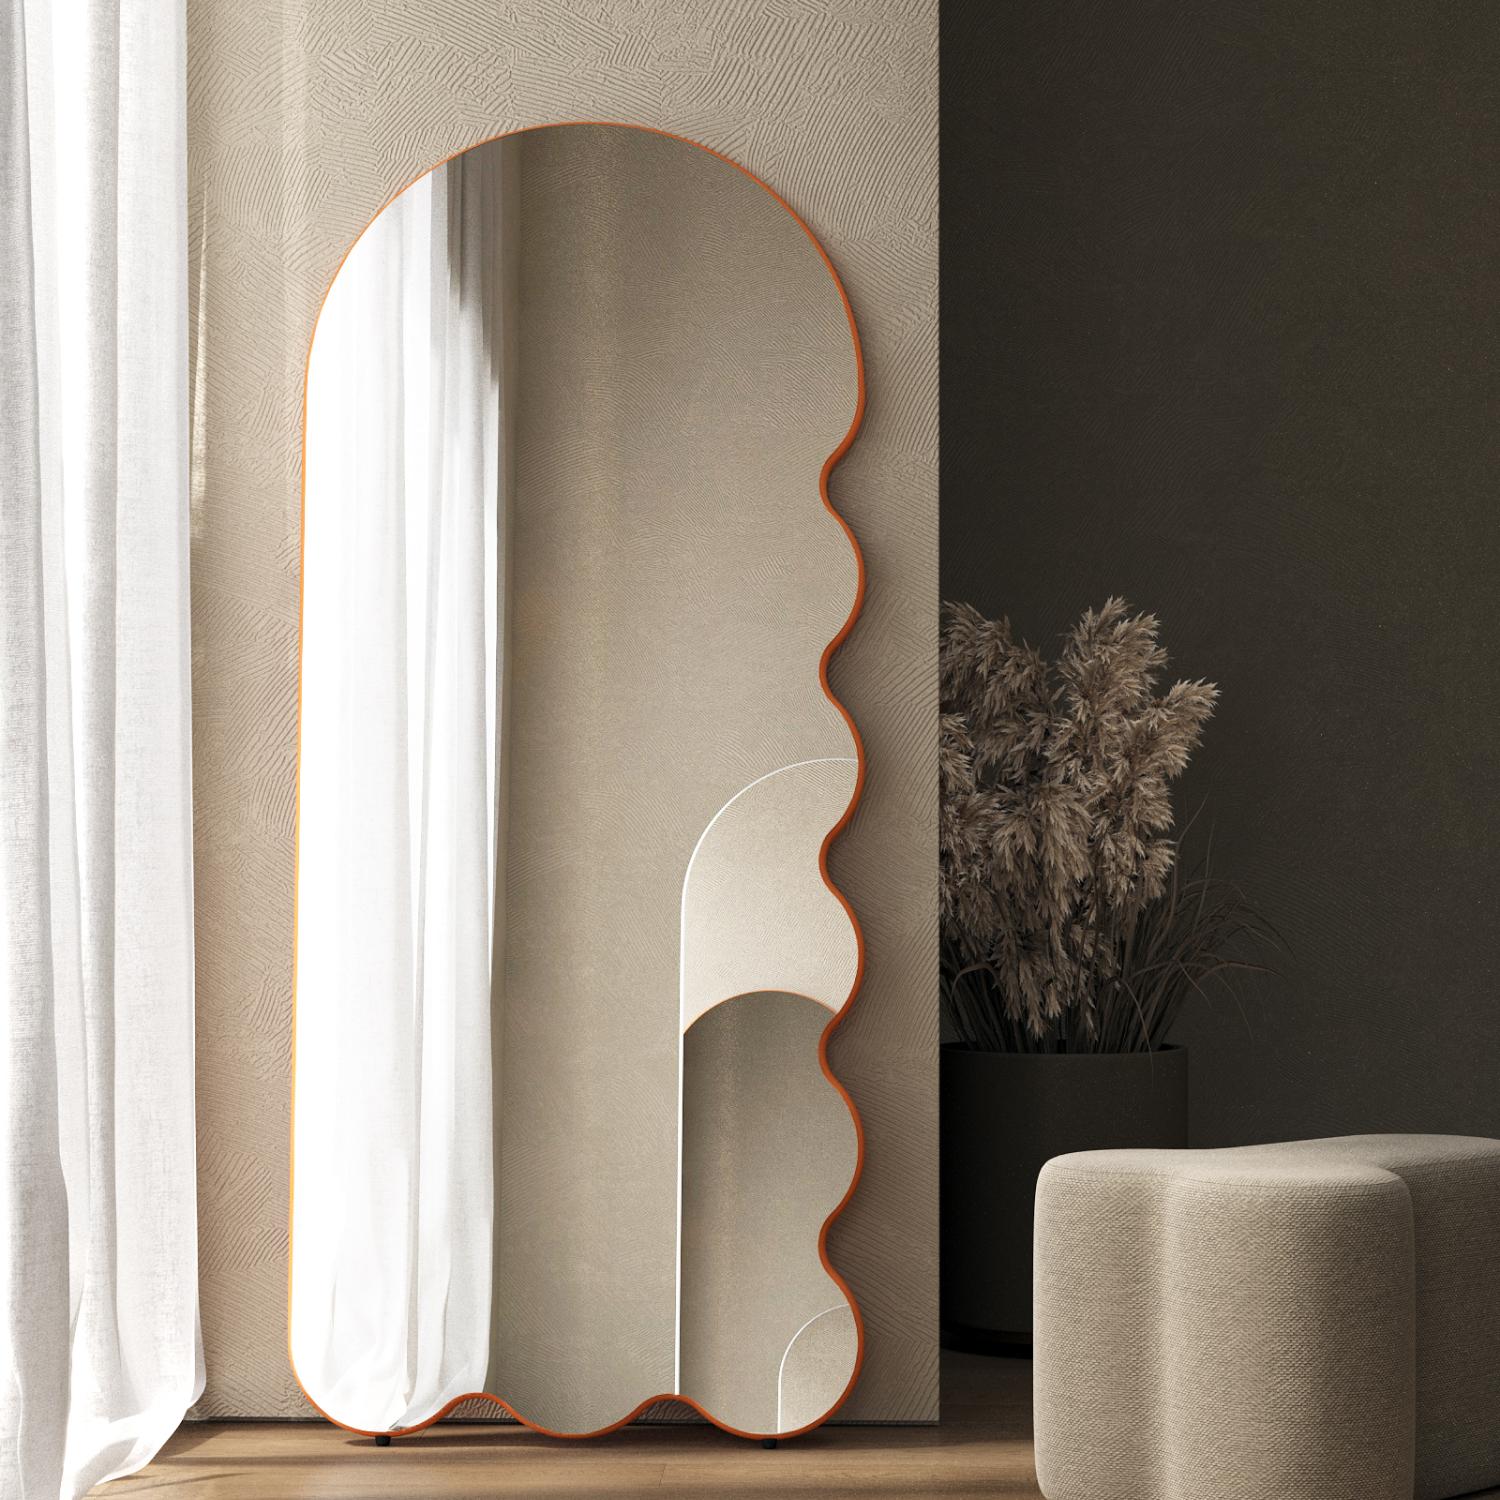 ARCHVYLI mirror
In our collection, we have two different mirrors that are bestsellers: Hvyli (wavy) and Loveself 01 (arched) mirrors.
When choosing between them, our clients always fell into a stupor and could not decide, as they adore